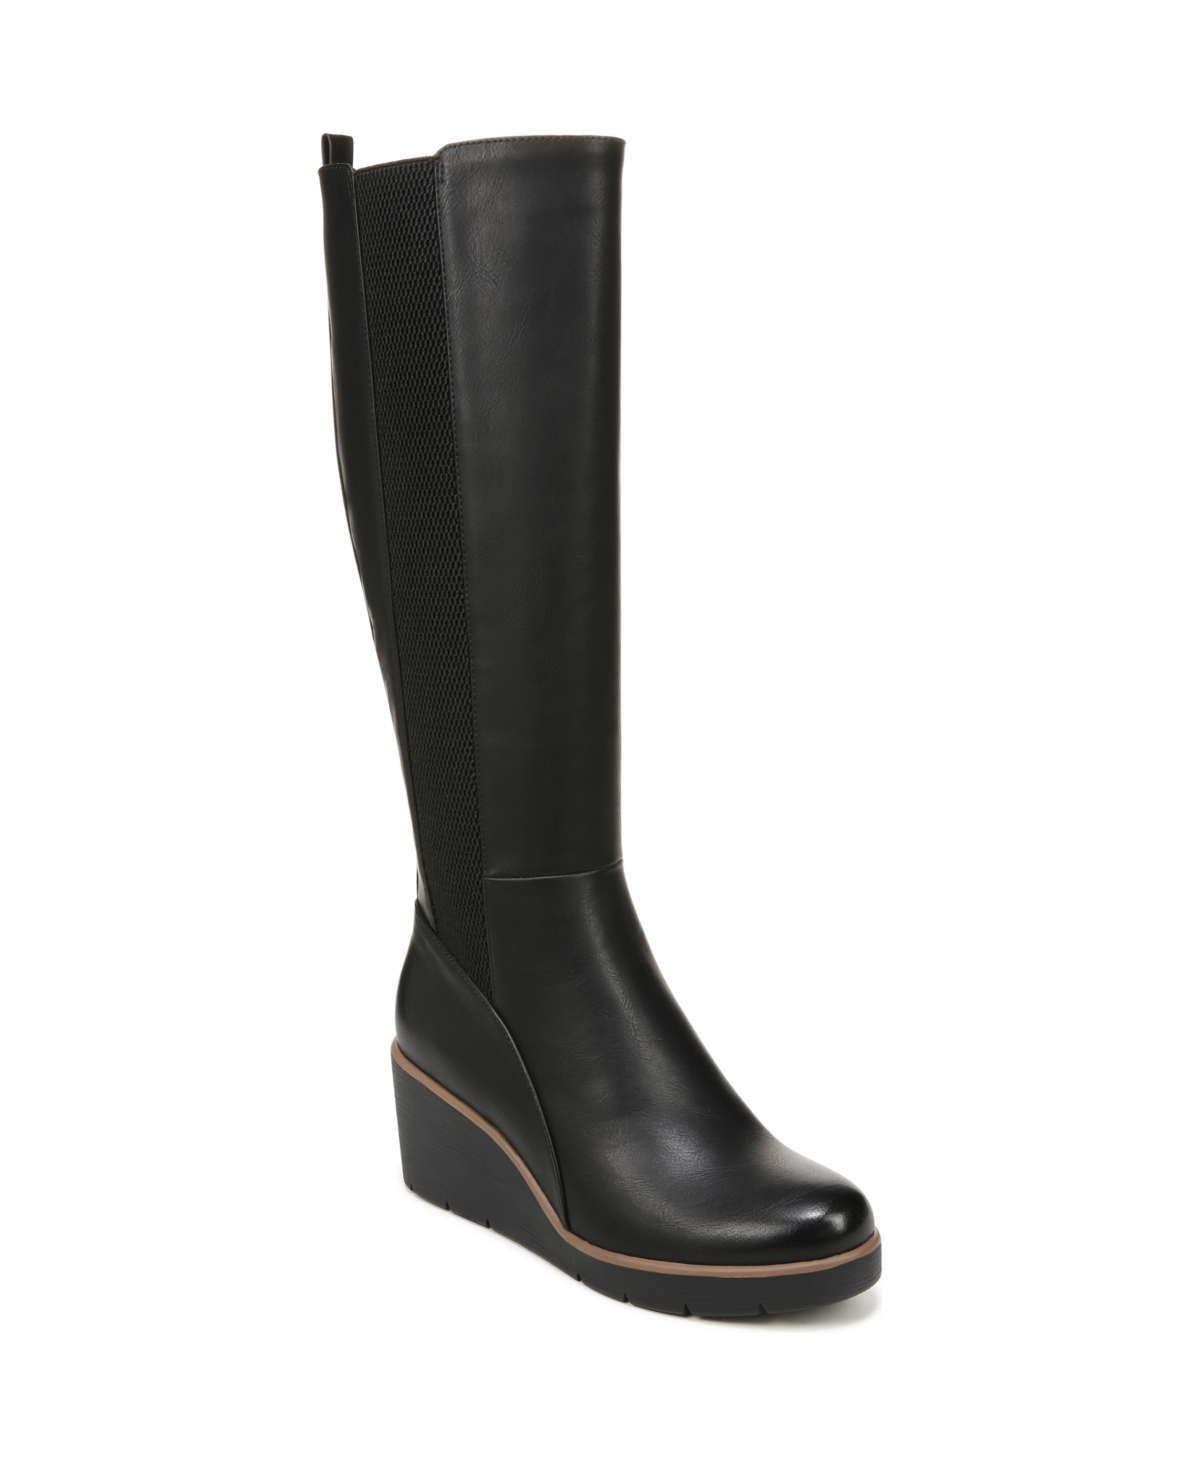 Adrian High Shaft Wedge Boots - Black Faux Leather